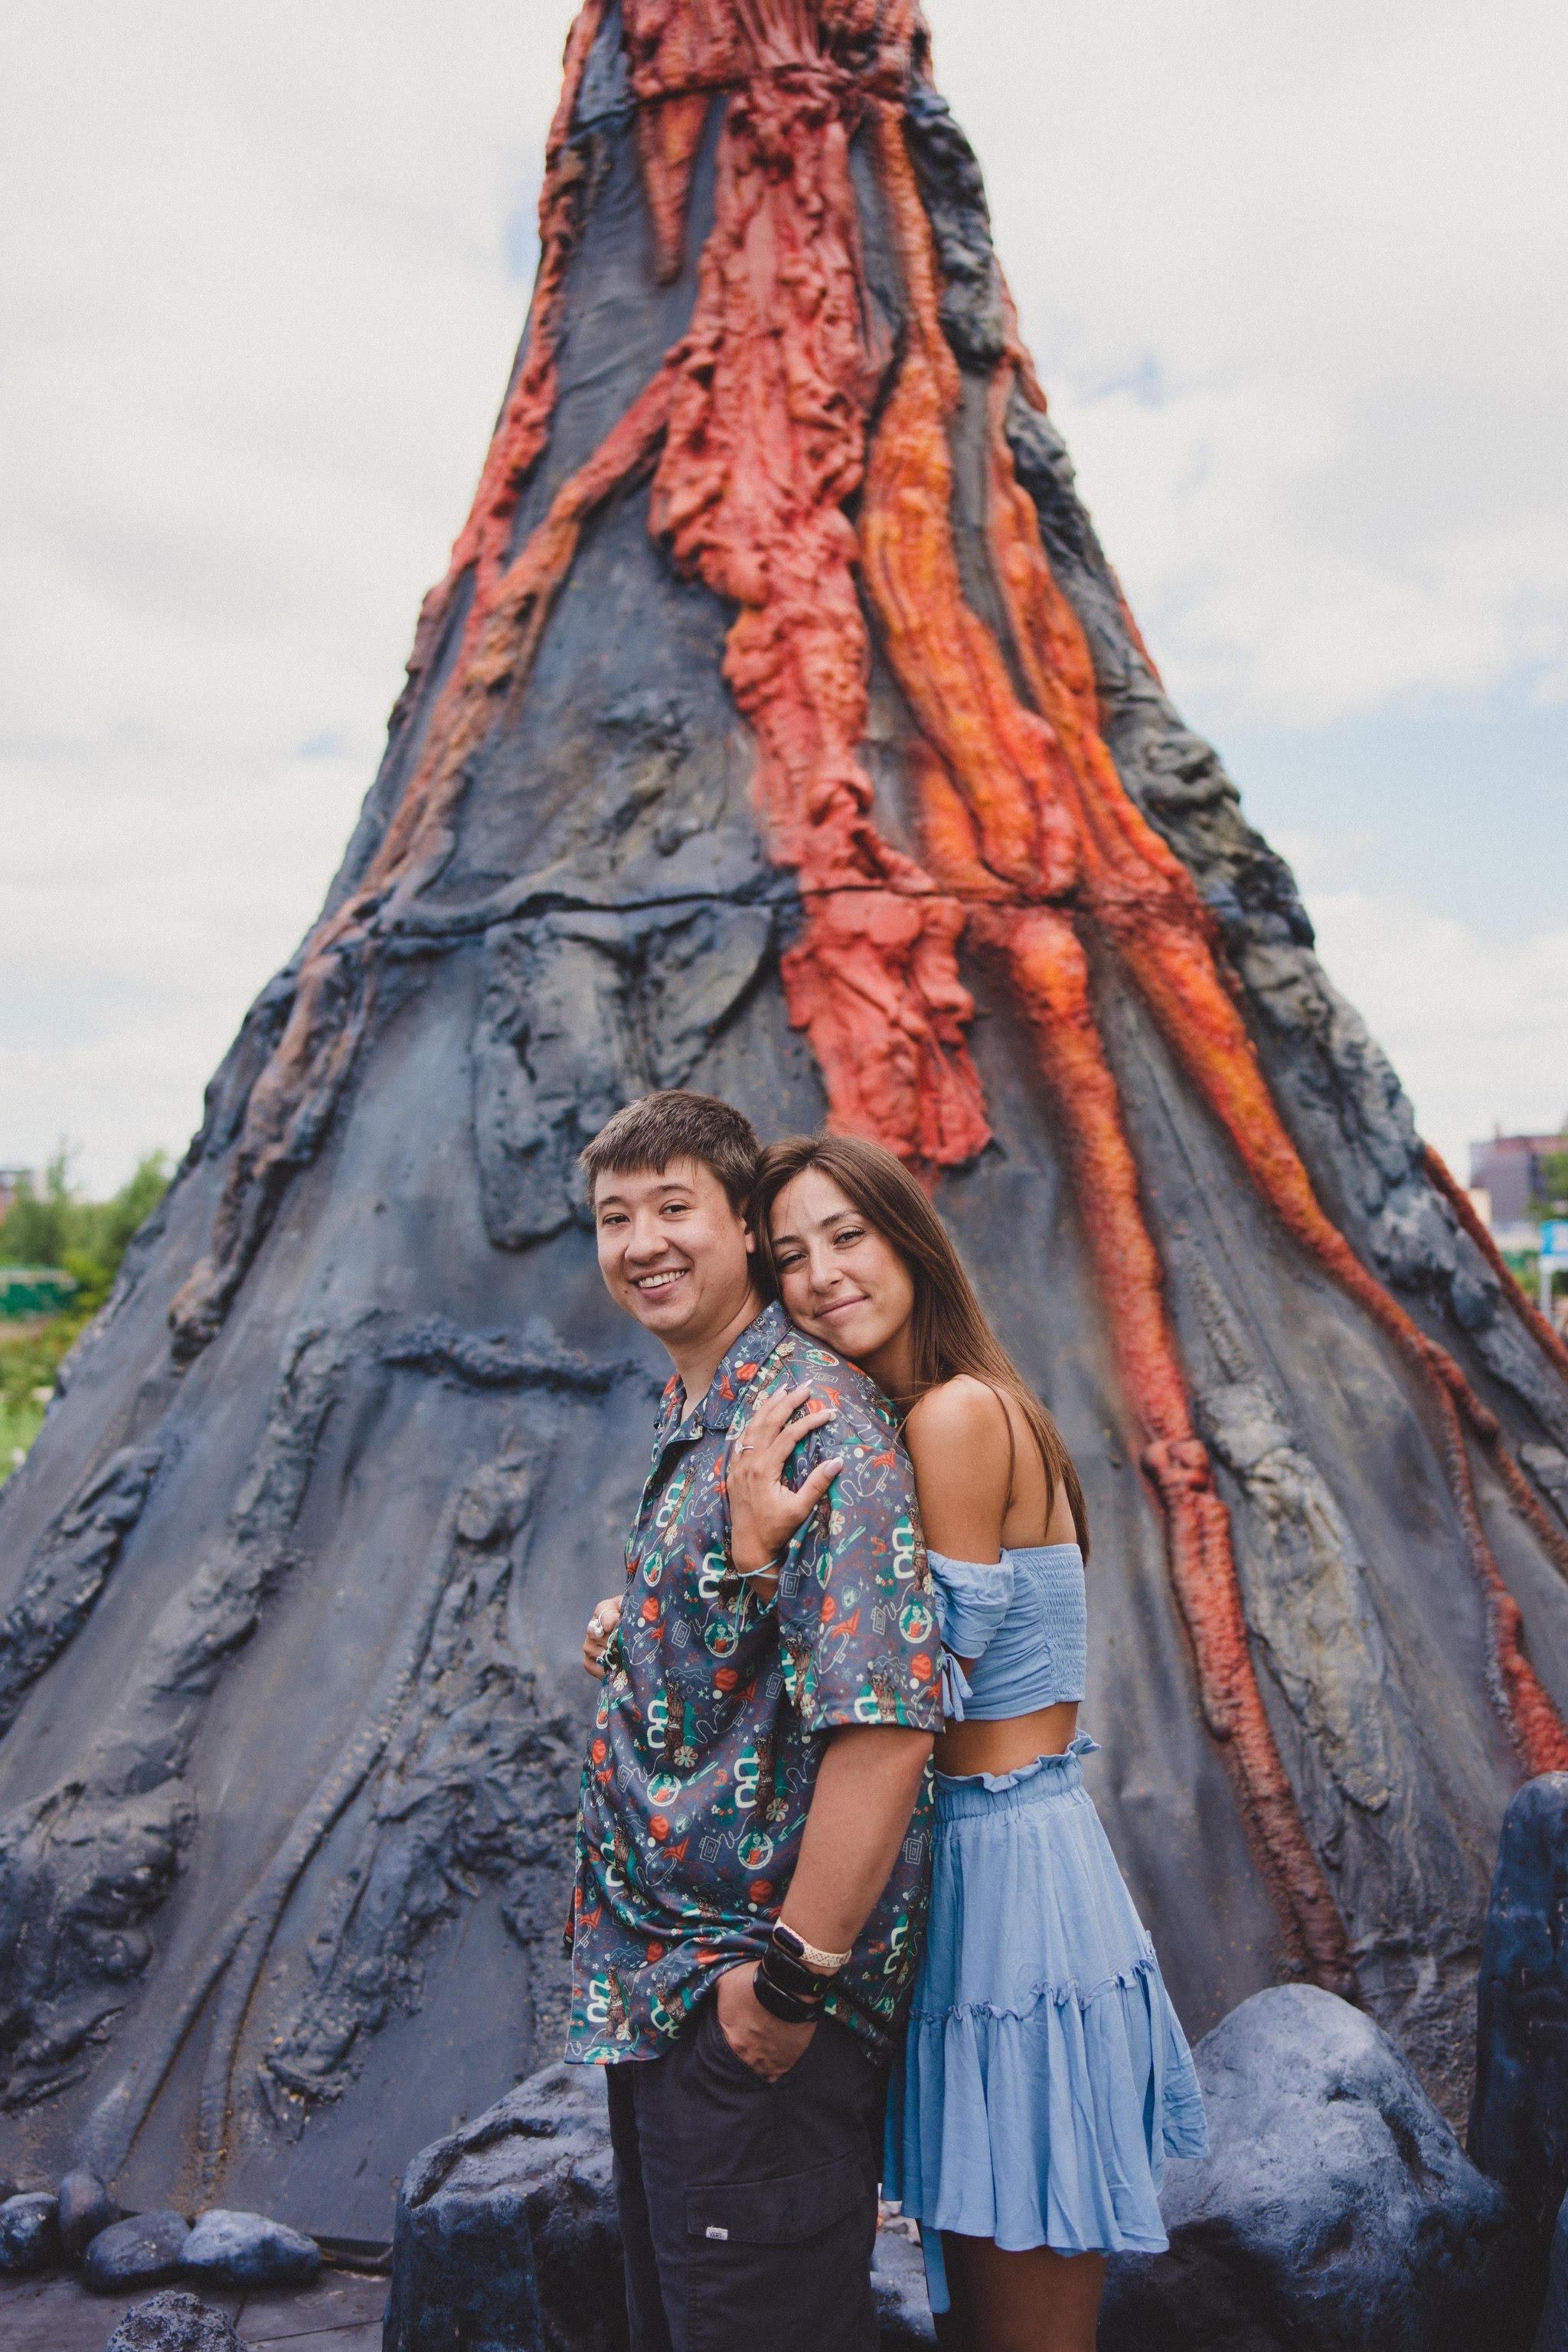 Brad and Kelsi posing in front of the volcano photo op at the NYC GO Fest.